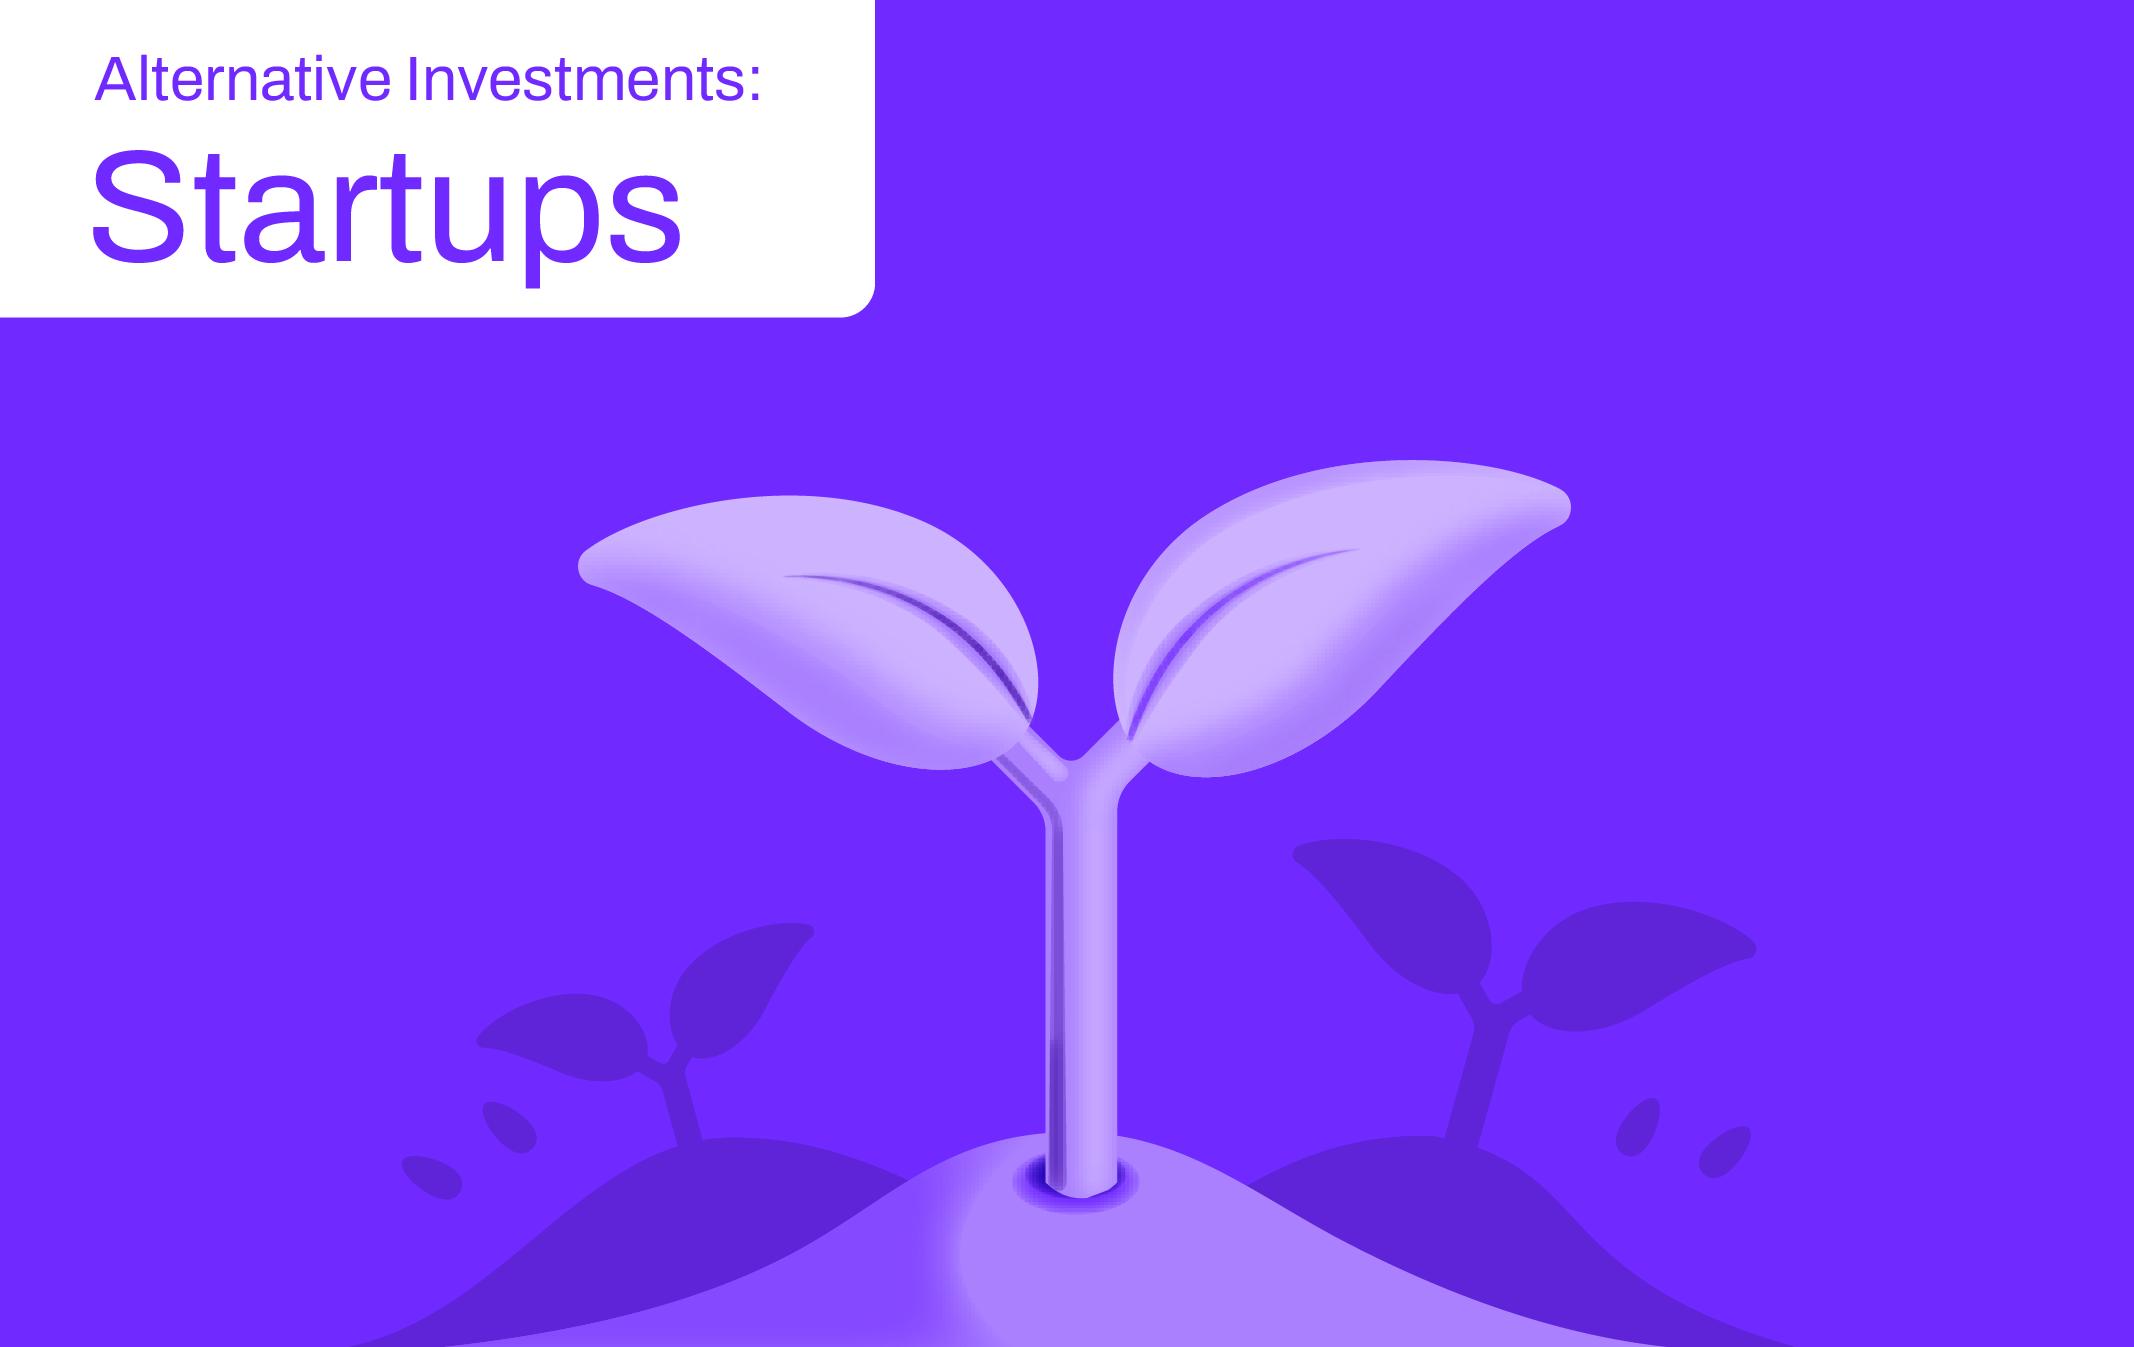 Interested in expanding your investments? Read why startup investing could be a good option.